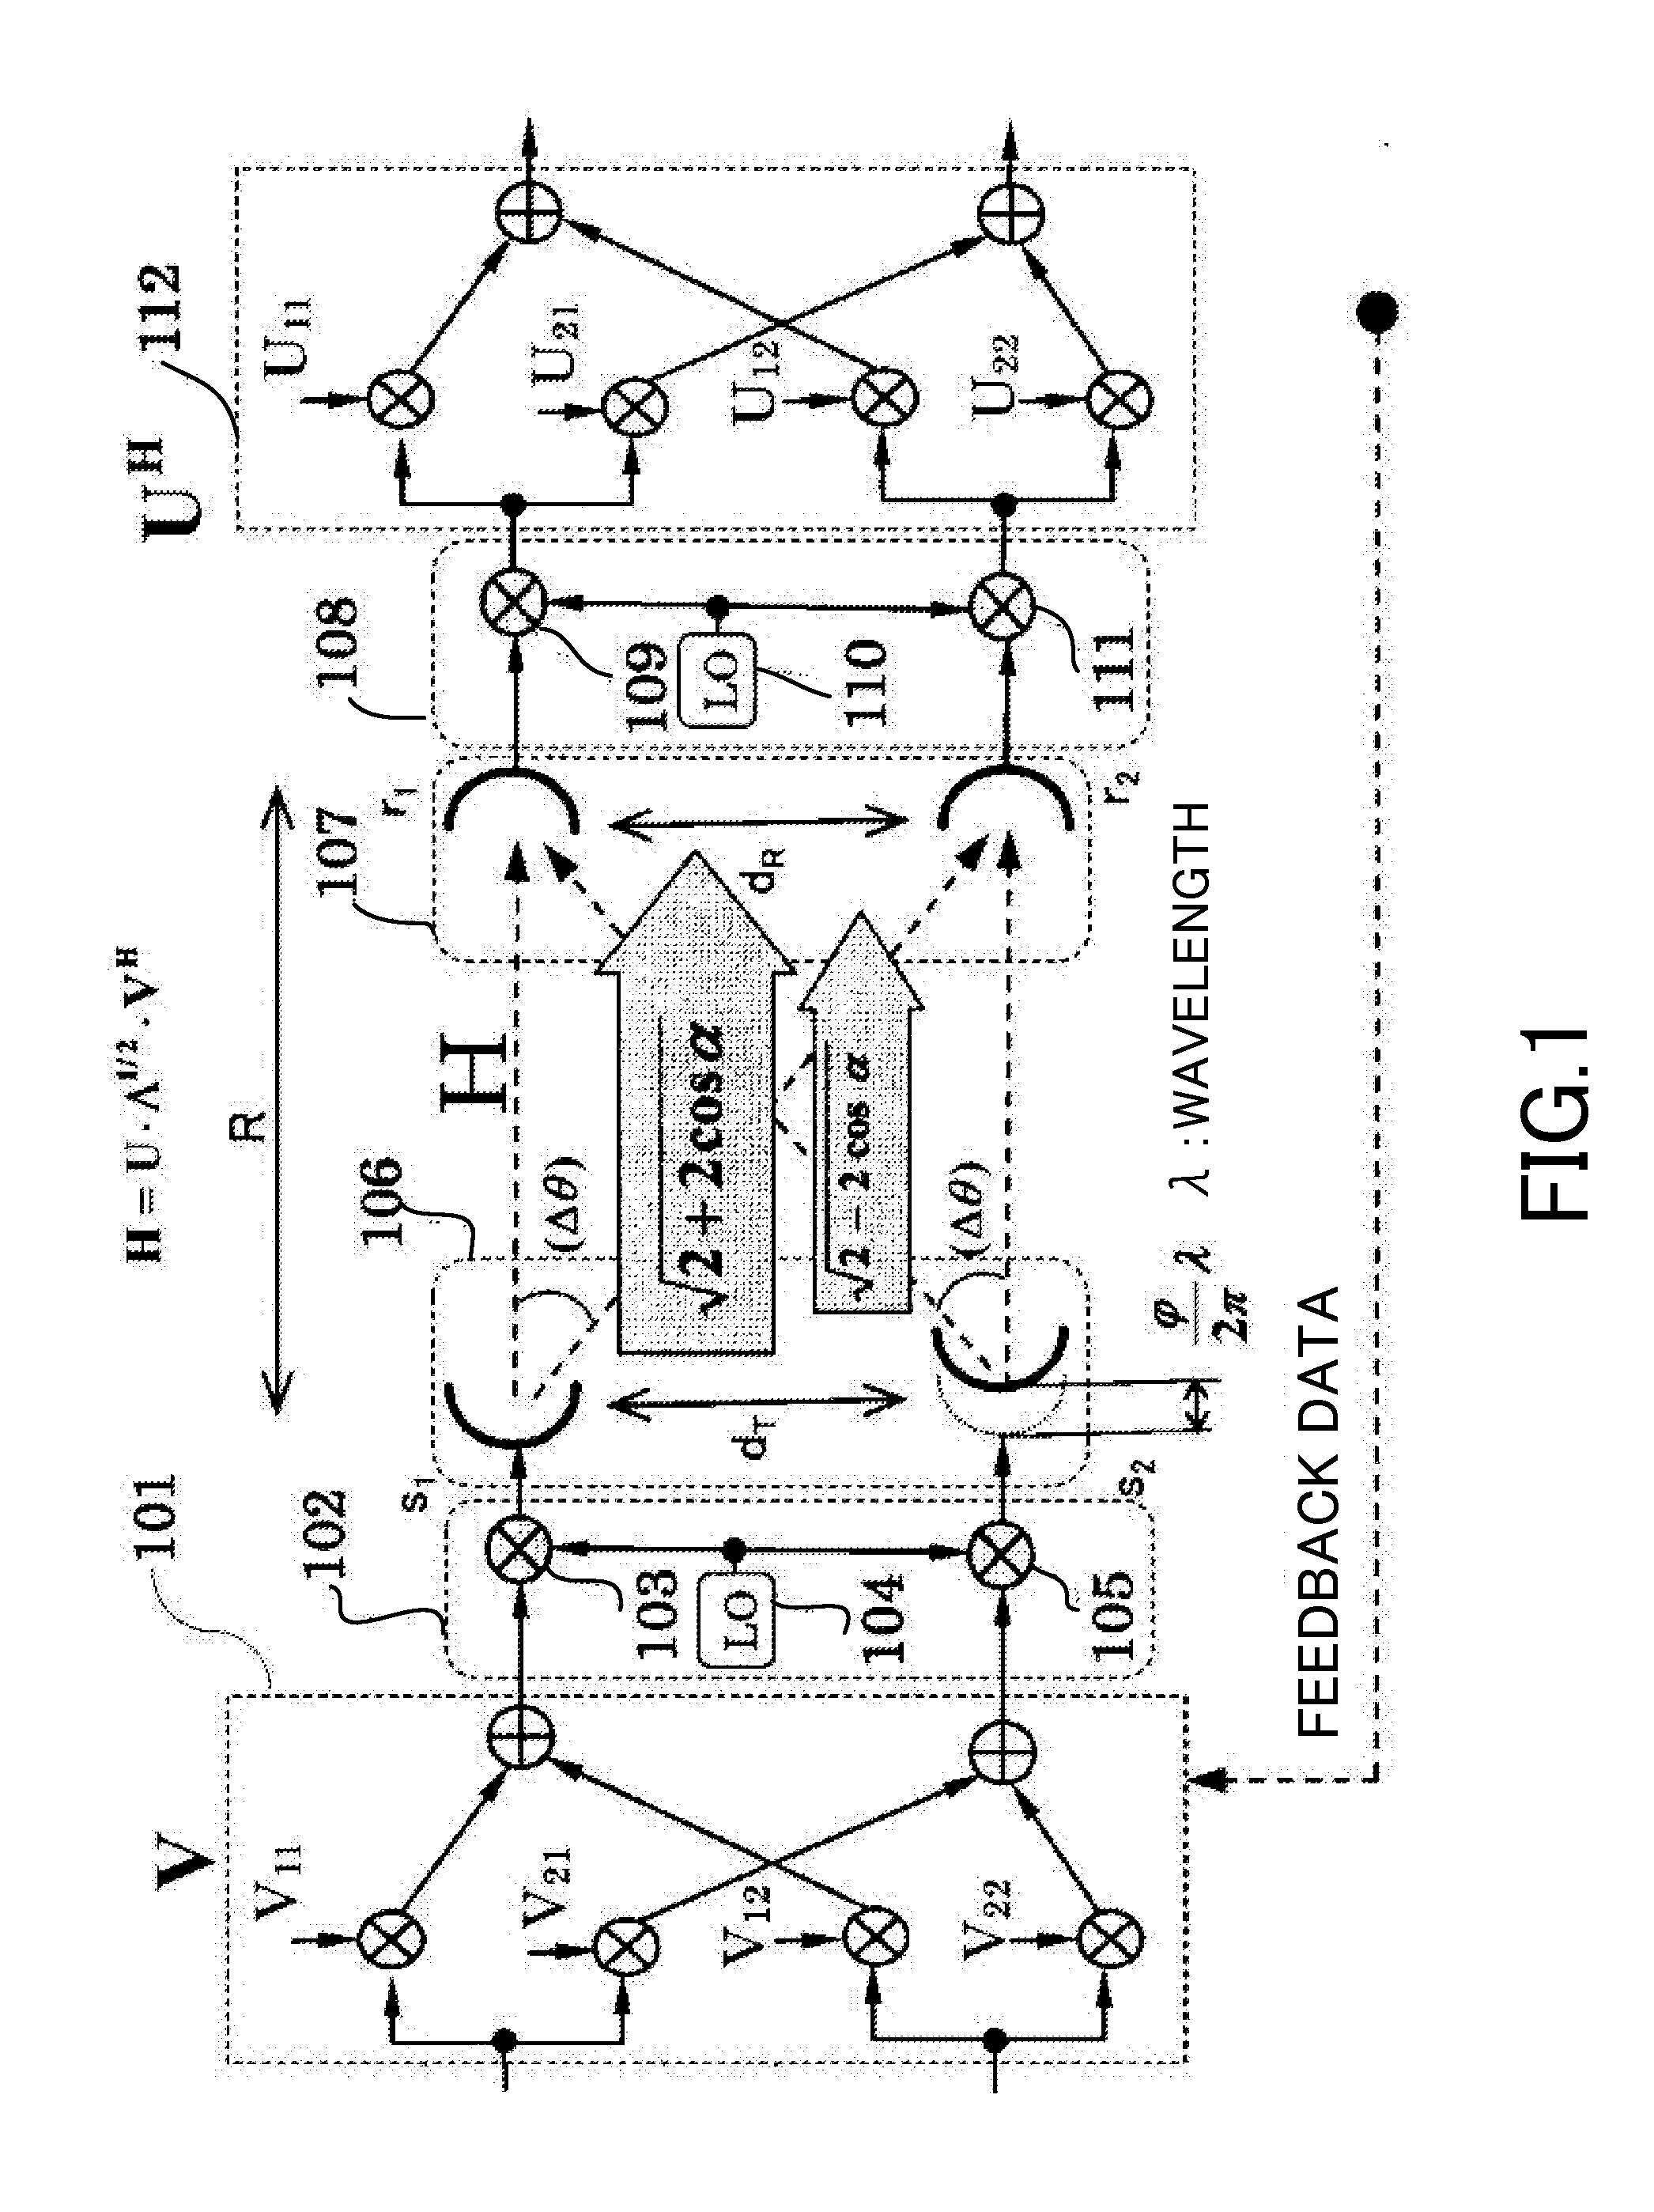 MIMO communication system for propagation environment including deterministic communication channel, and antennas for MIMO communication system